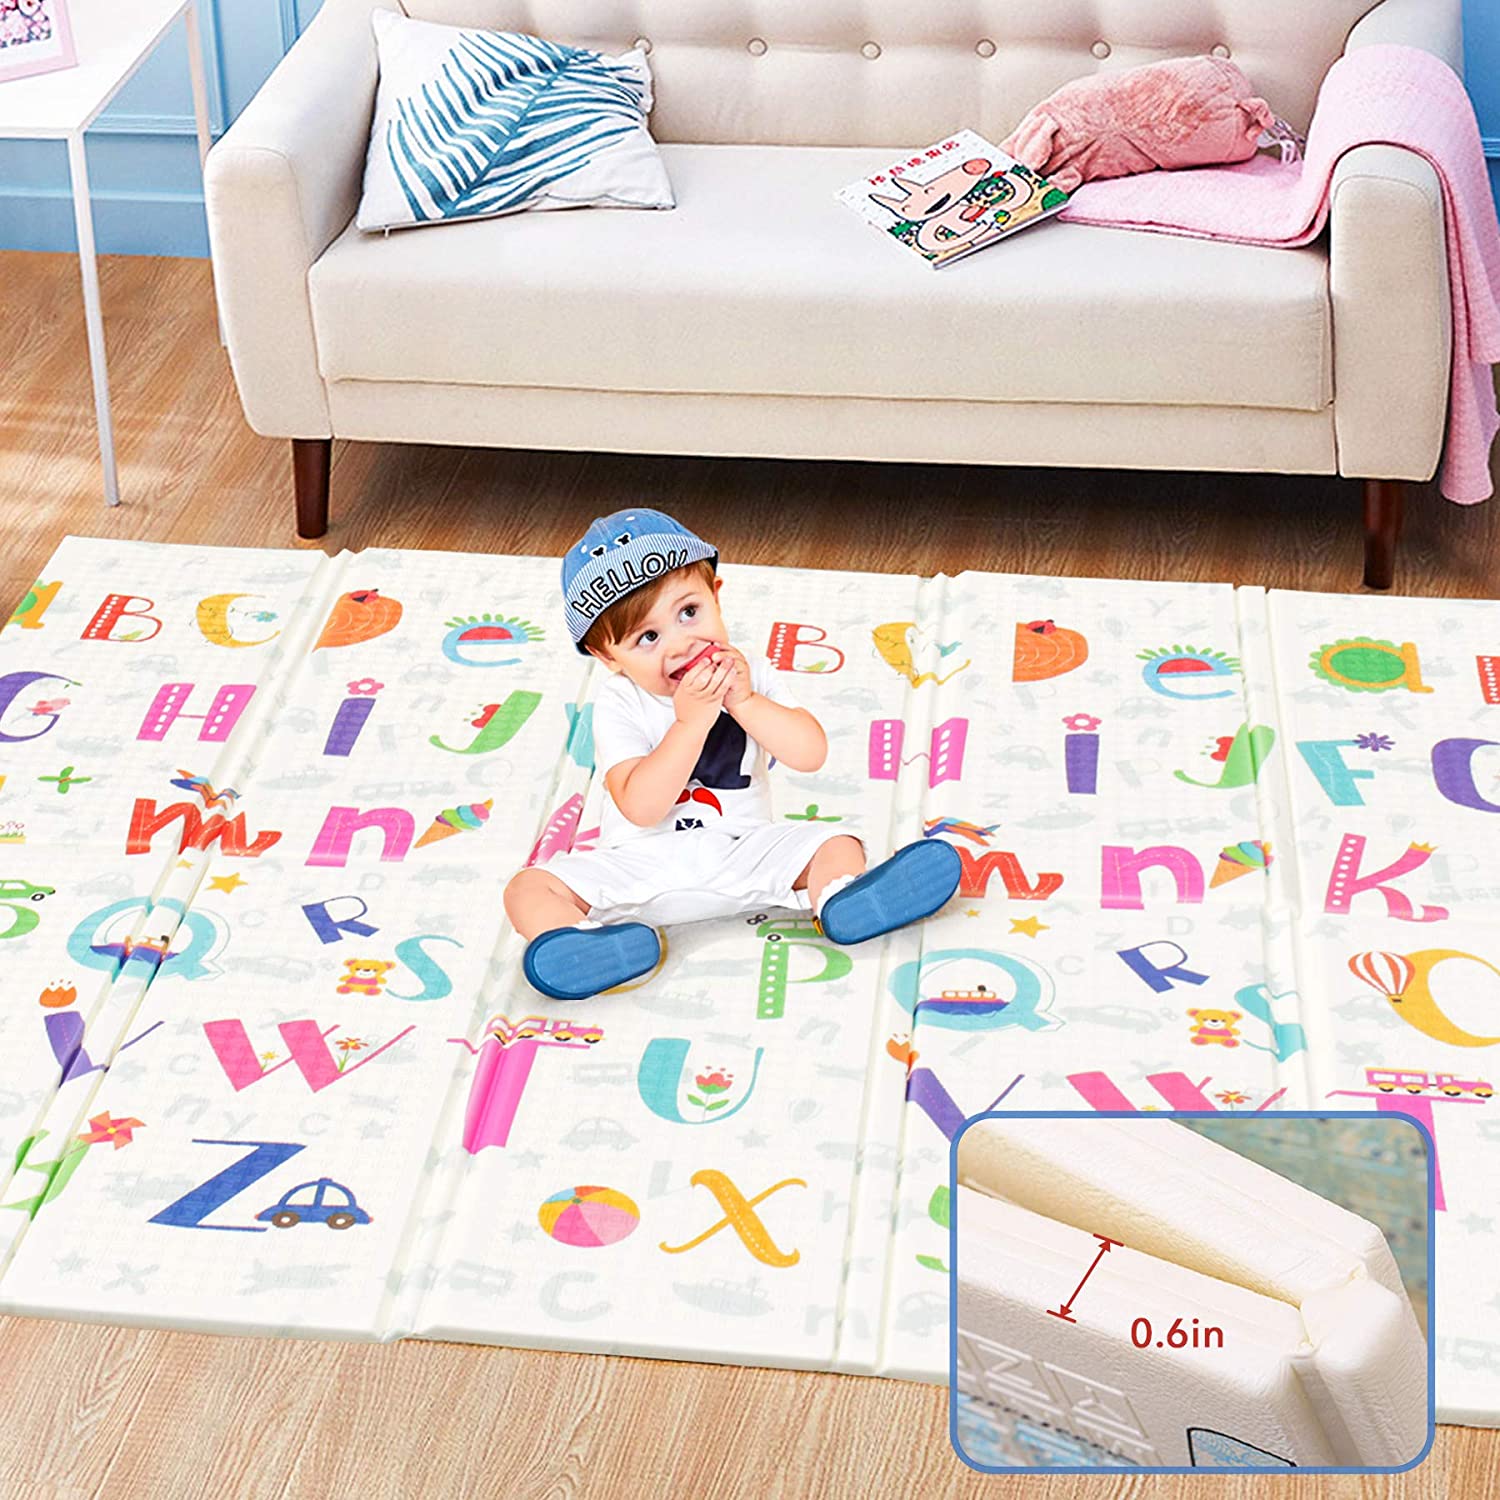 New Arrival China Baby Tent For Garden - Foldable Baby Play Mat 0.6 Inch Thick Waterproof Baby Crawling Mat 79” x 71” Extra Large Play Mats for Babies Reversible Multifunctional Mats (Letter) R...